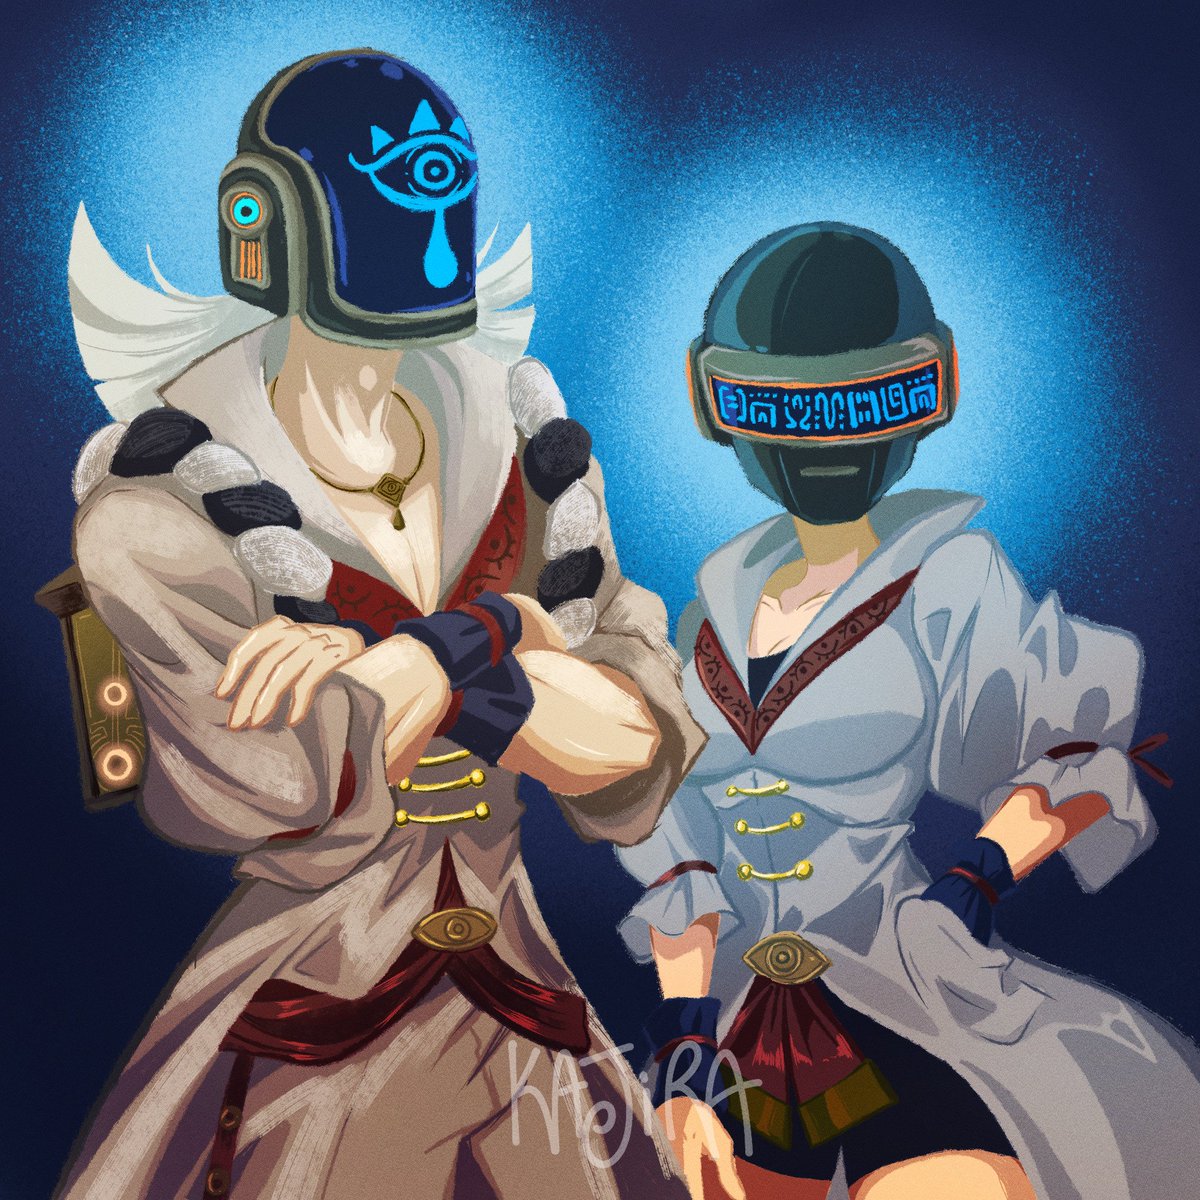 #Zelda x Daft Punk fanart from awhile back starring Robbie and Purah